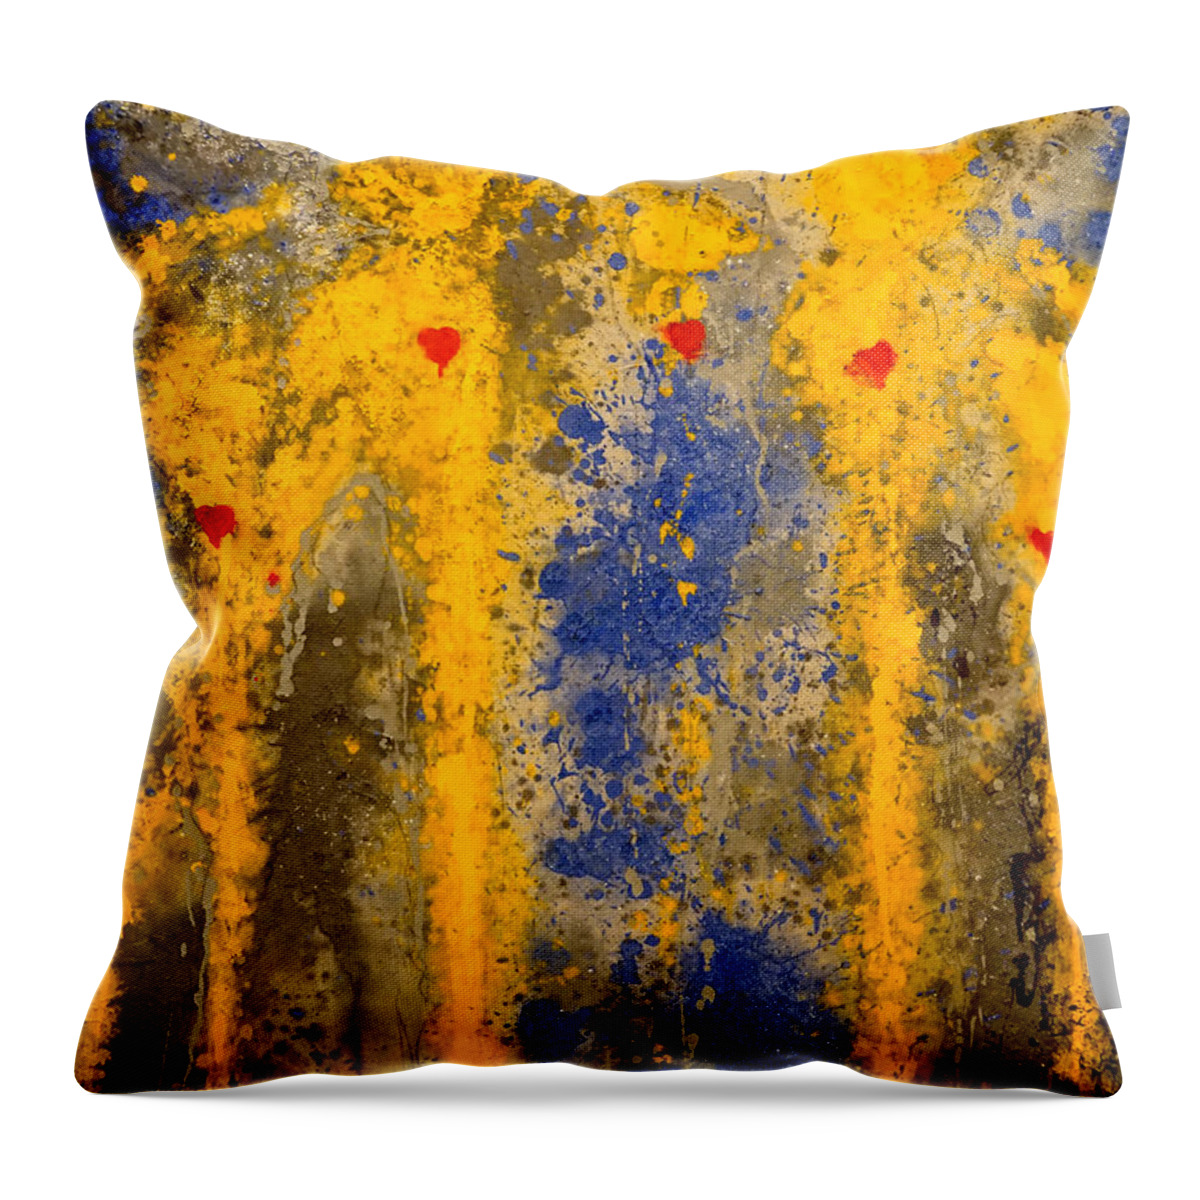 Original Art Throw Pillow featuring the painting The Guardians of Heaven by Giorgio Tuscani